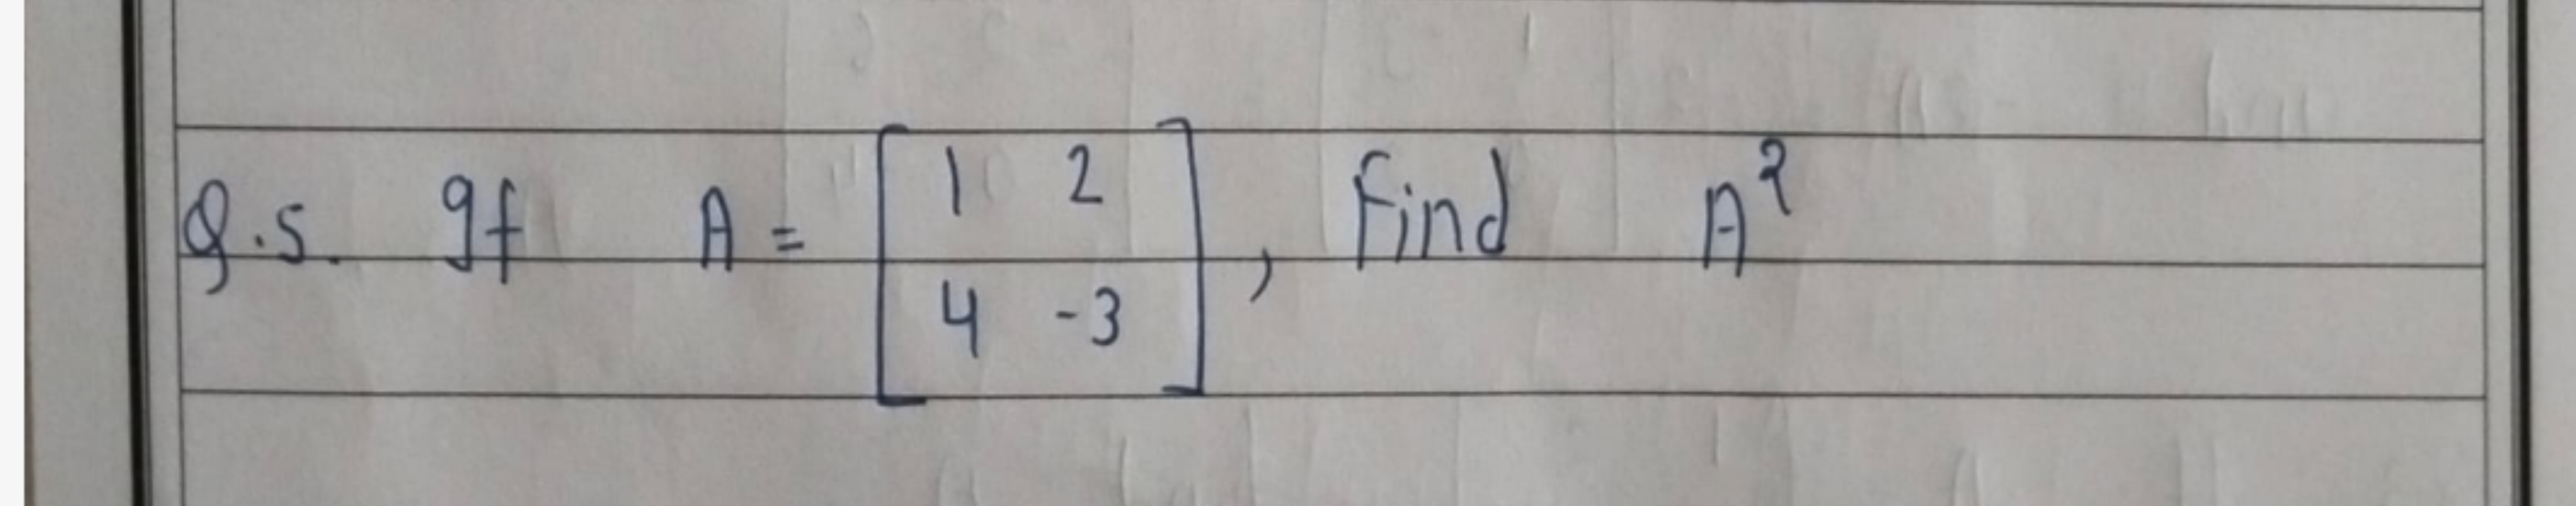 Q.5. If A=[14​2−3​], Find A2
